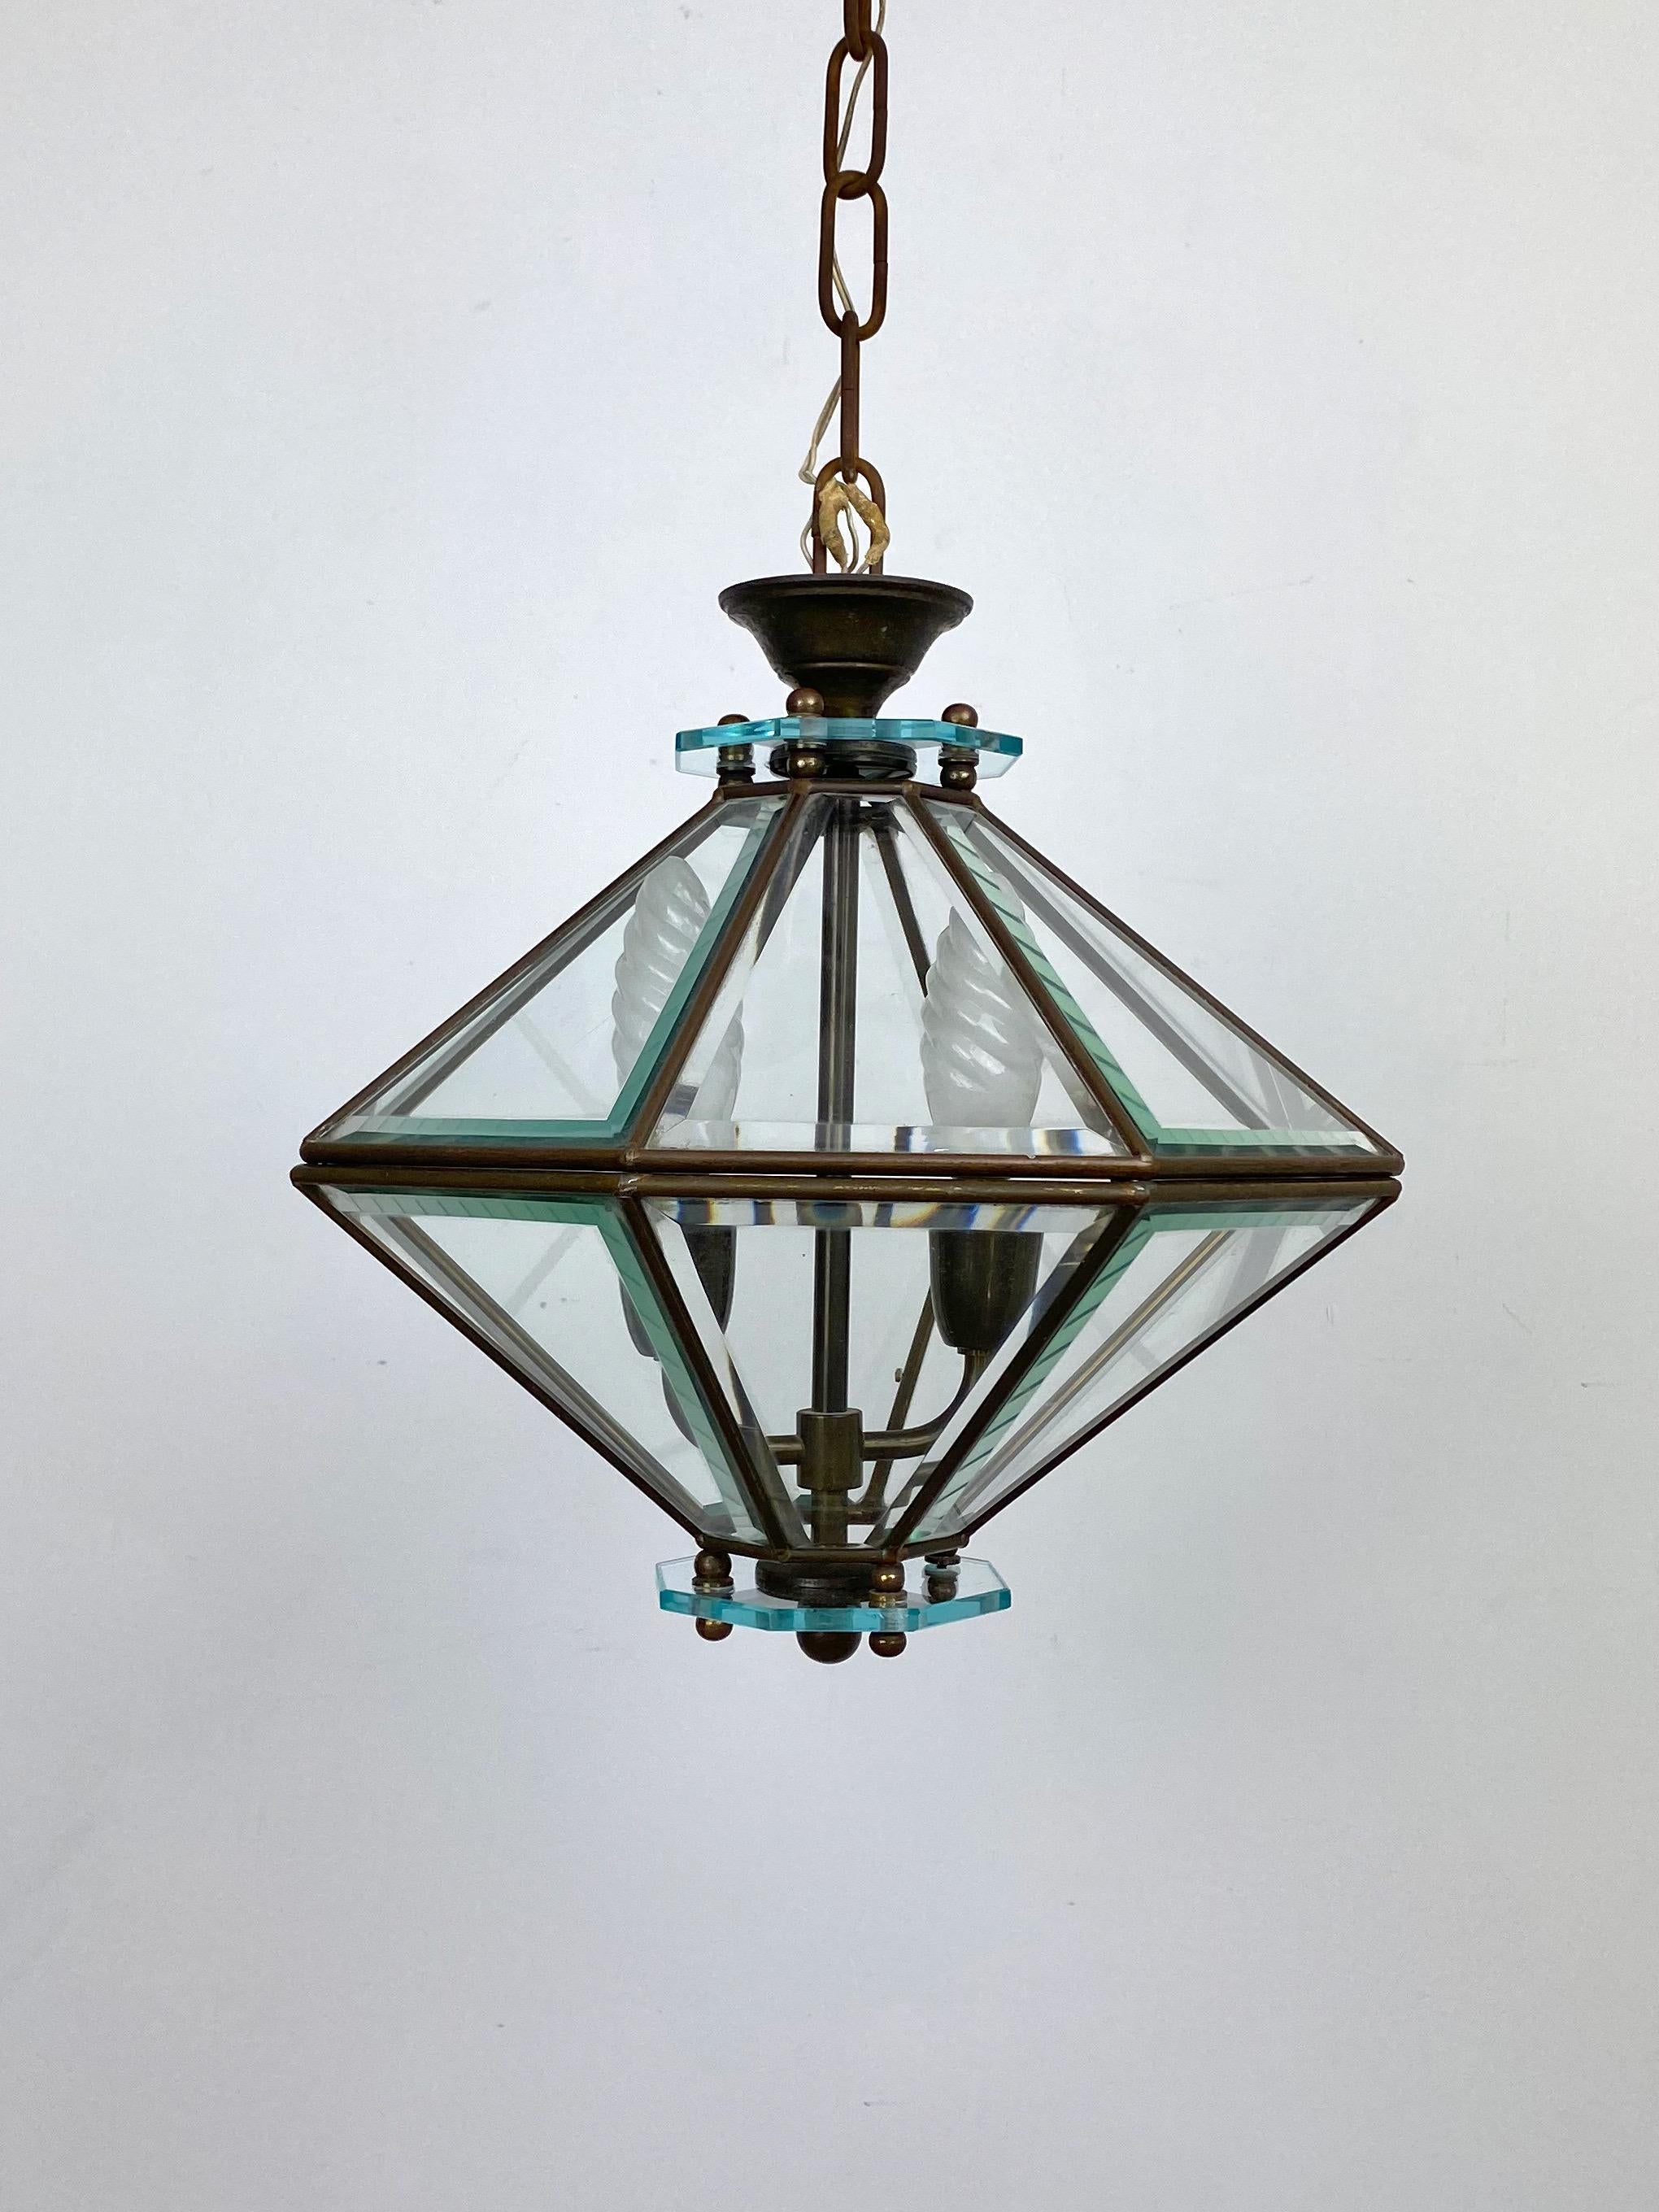 Diamond-shaped chandelier pendant by Fontana Arte, glass and brass details, made in Italy in the late 1950s. 

Measures: Height with pendant 82 cm.
Height without pendant 30 cm.
Diameter 30 cm.